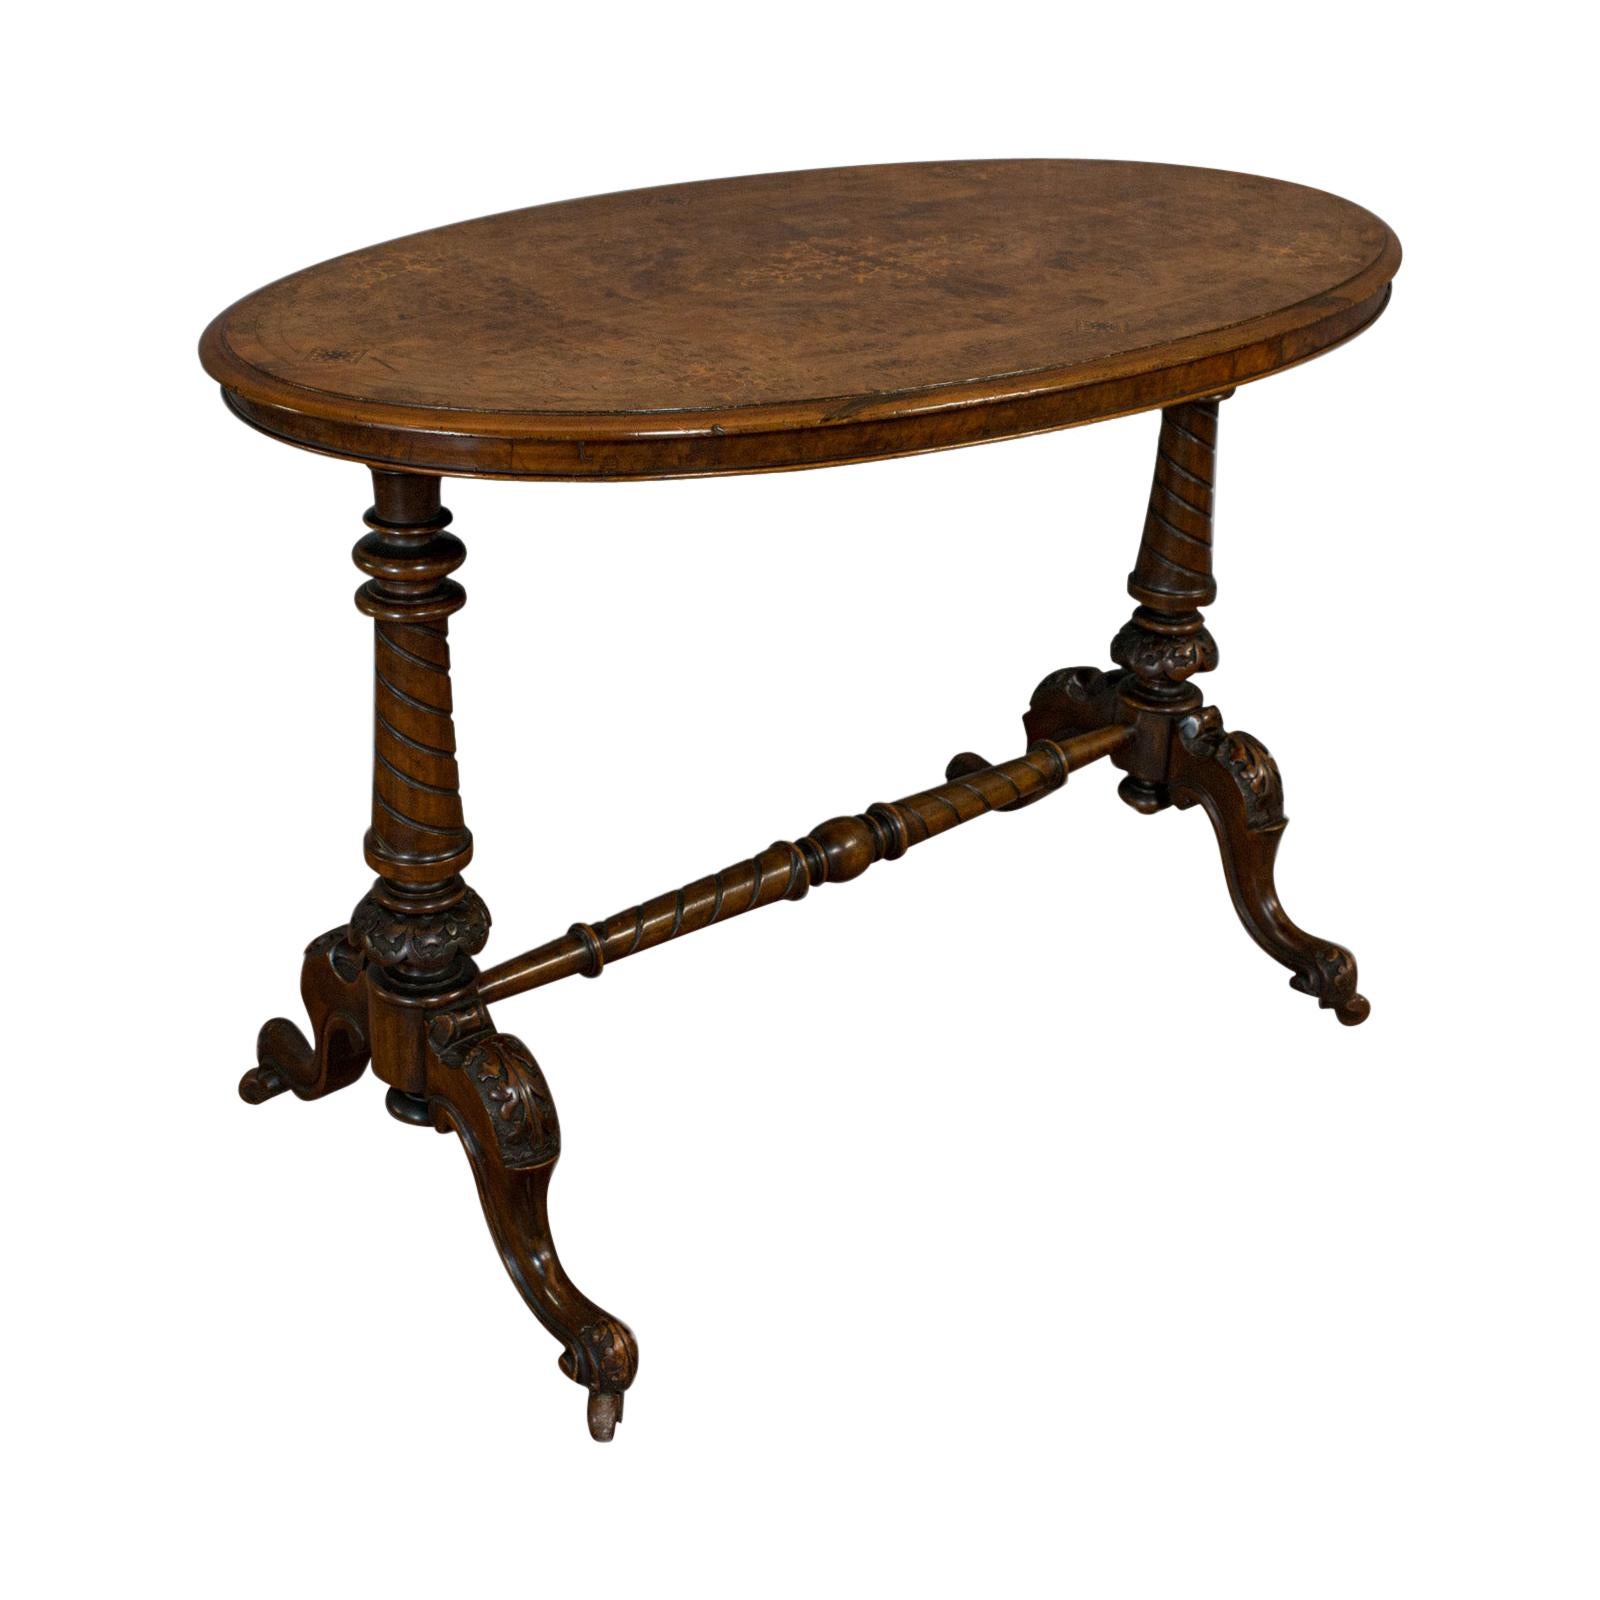 Antique Oval Table, English, Burr Walnut, Centre, Side, Victorian, circa 1870 For Sale